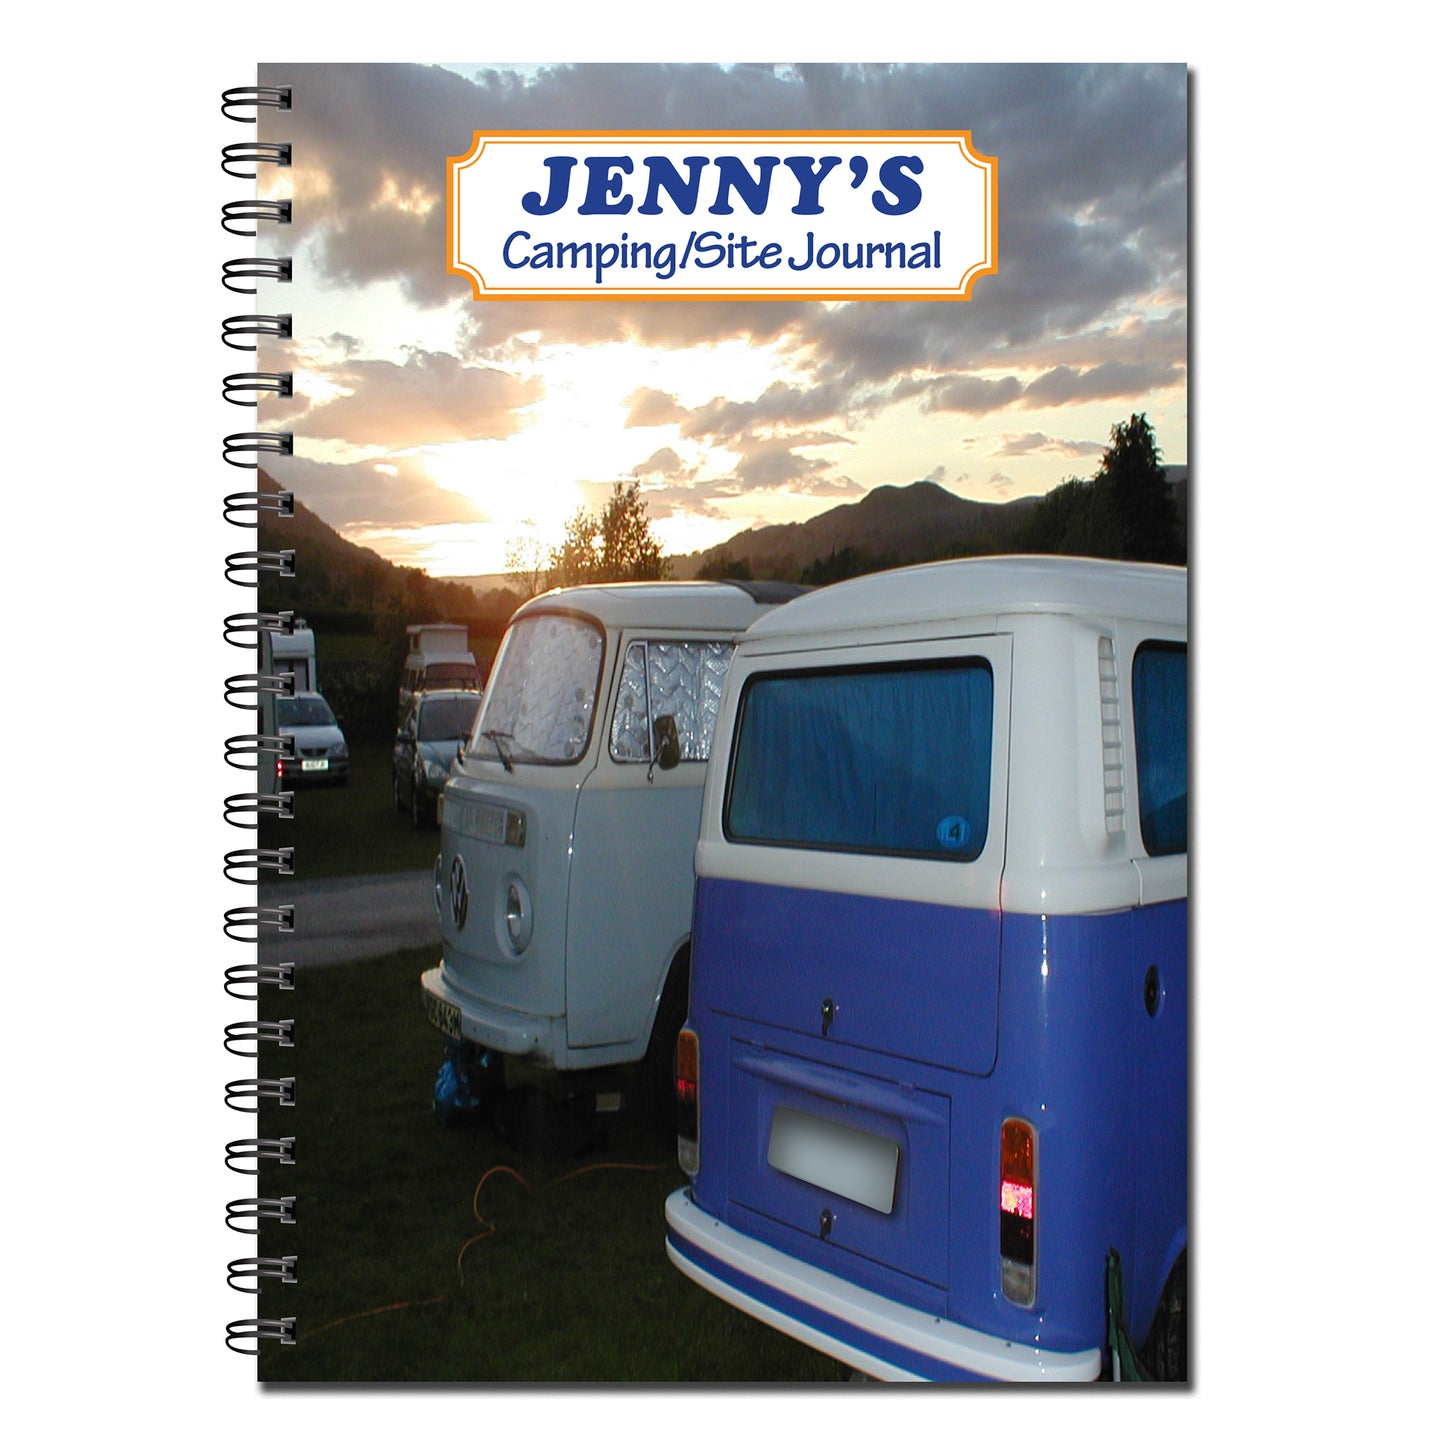 PERSONALISED Camping/Site Journal | Campsite Review | A5 148mm x 210mm | 51 Double sided Pages | Printed on quality 120gsm